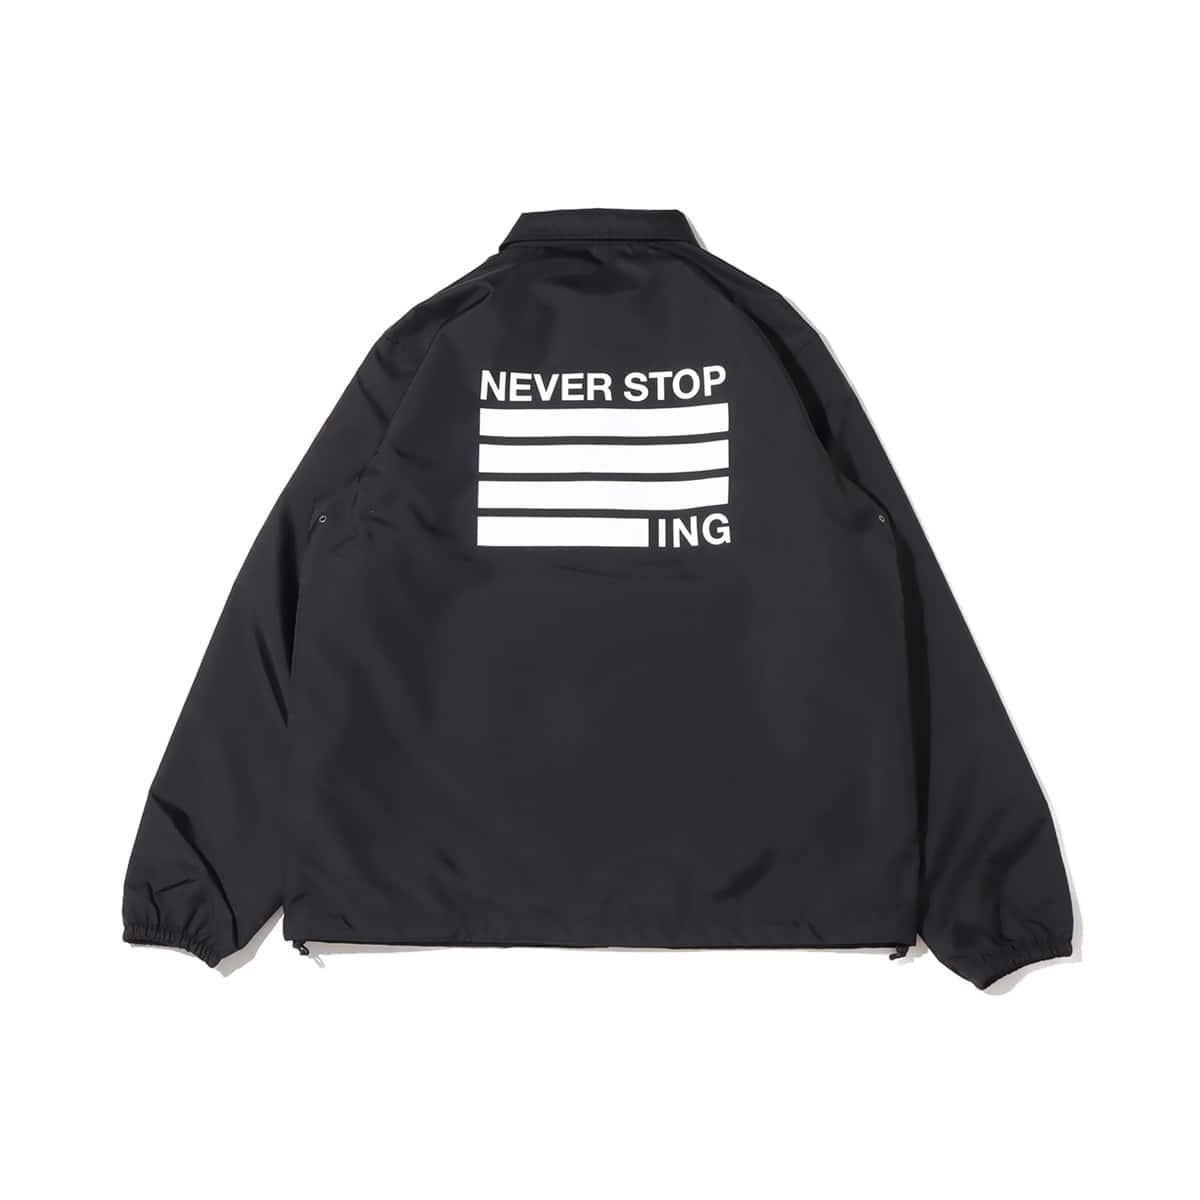 THE NORTH FACE NEVER STOP ING THE COACH JACKET BLACK 23FW-I